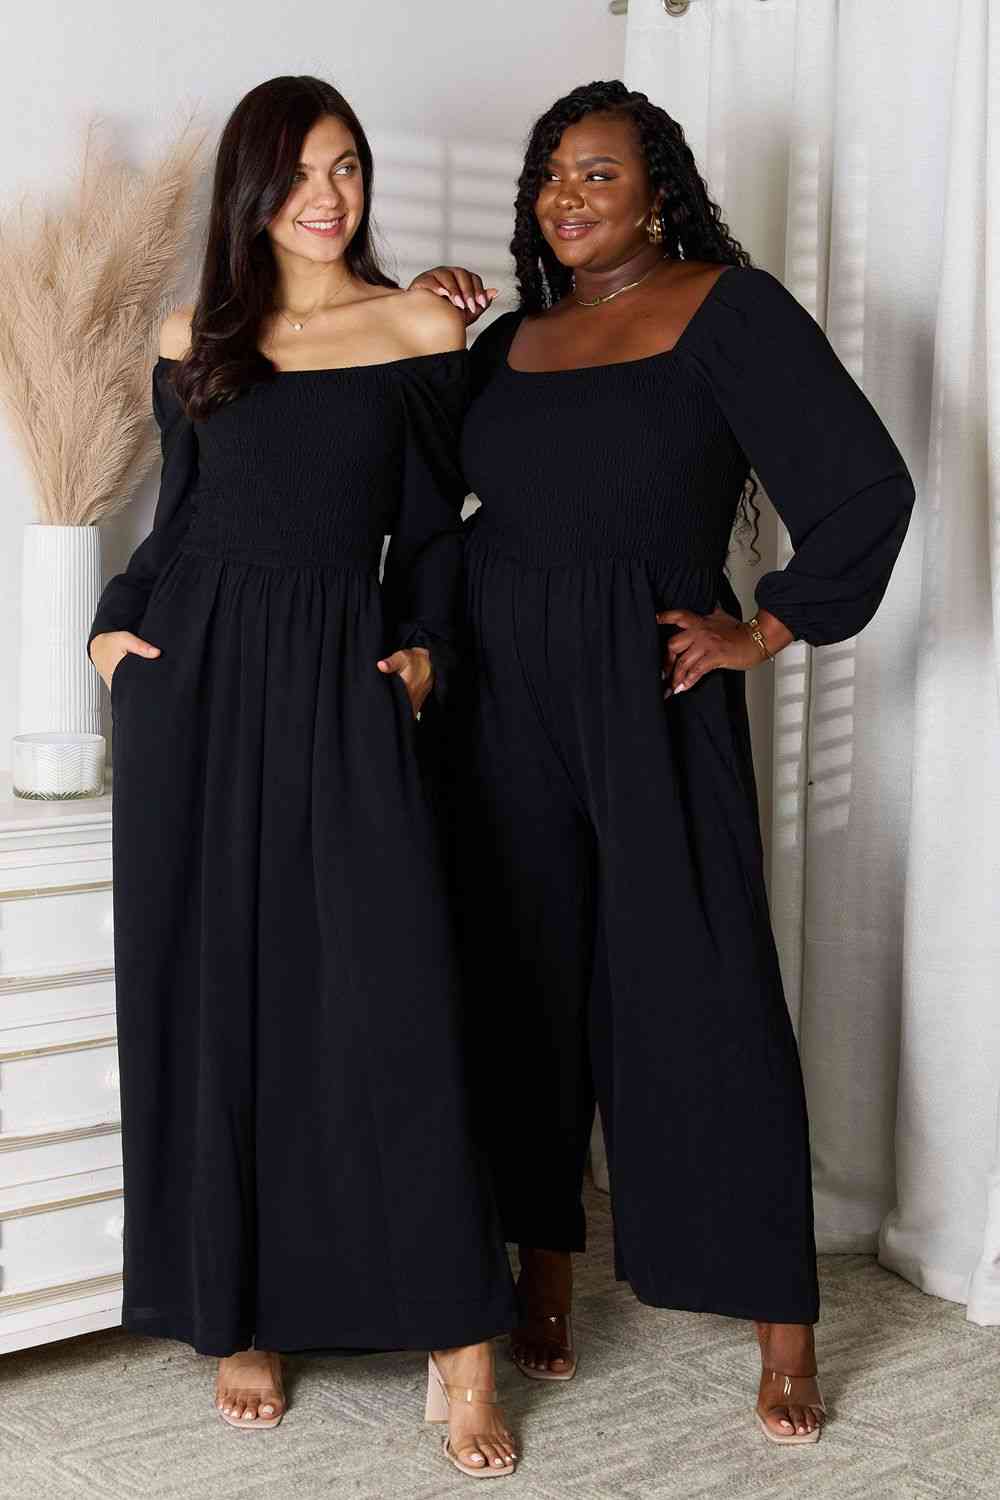 Square Neck Jumpsuit with Pockets - Kawaii Stop - Chic Clothing, Double Take, Fashionable Convenience, Hand Washable Jumpsuit, Luxurious Feel, Opaque Material, Pocketed Jumper, Practical Fashion, Ship from USA, Smocked Design, Square Neck Jumpsuit, Stylish One-Piece, Trendy Jumpsuit, Versatile Outfit, Women's Apparel